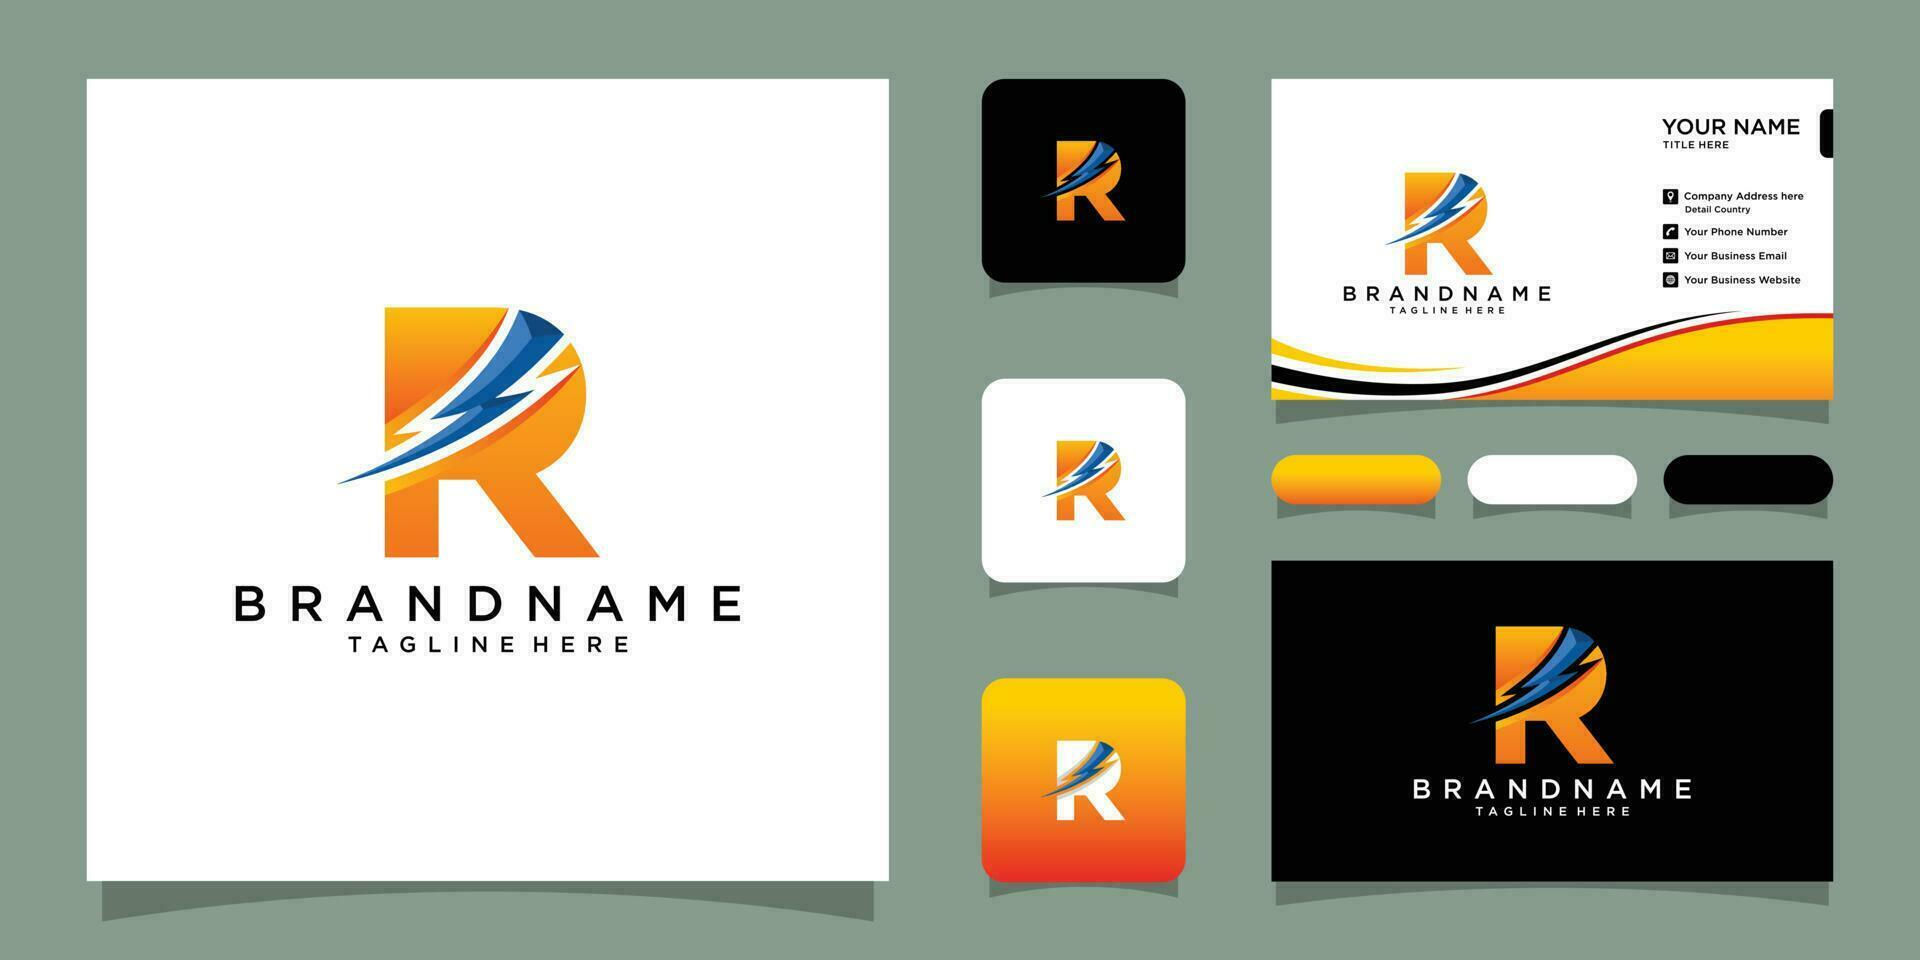 Flash R letter logo icon electrical bolt with initial R letter logo design Premium Vector